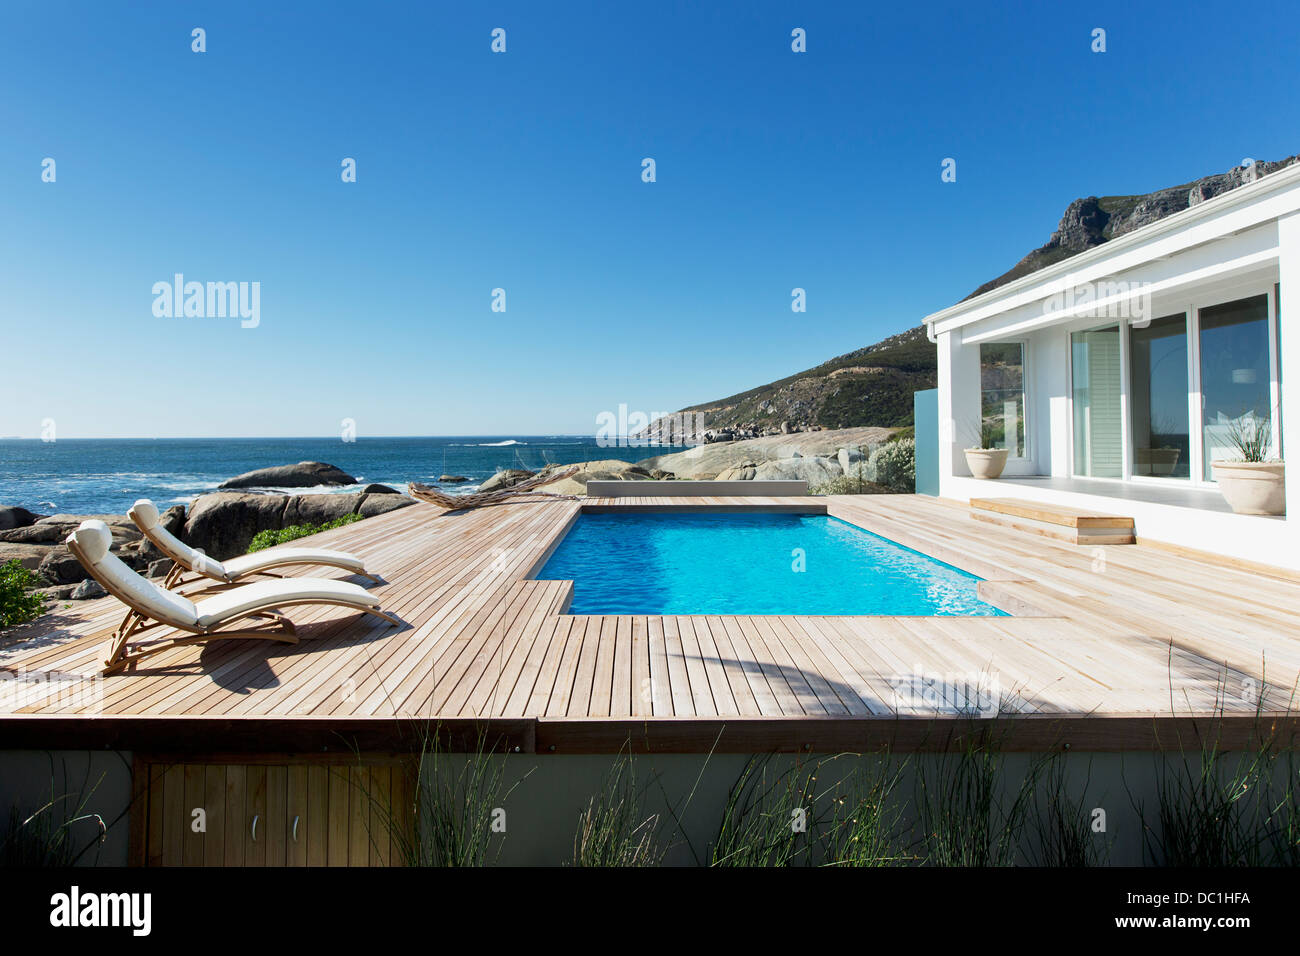 Luxury swimming pool with ocean view Stock Photo